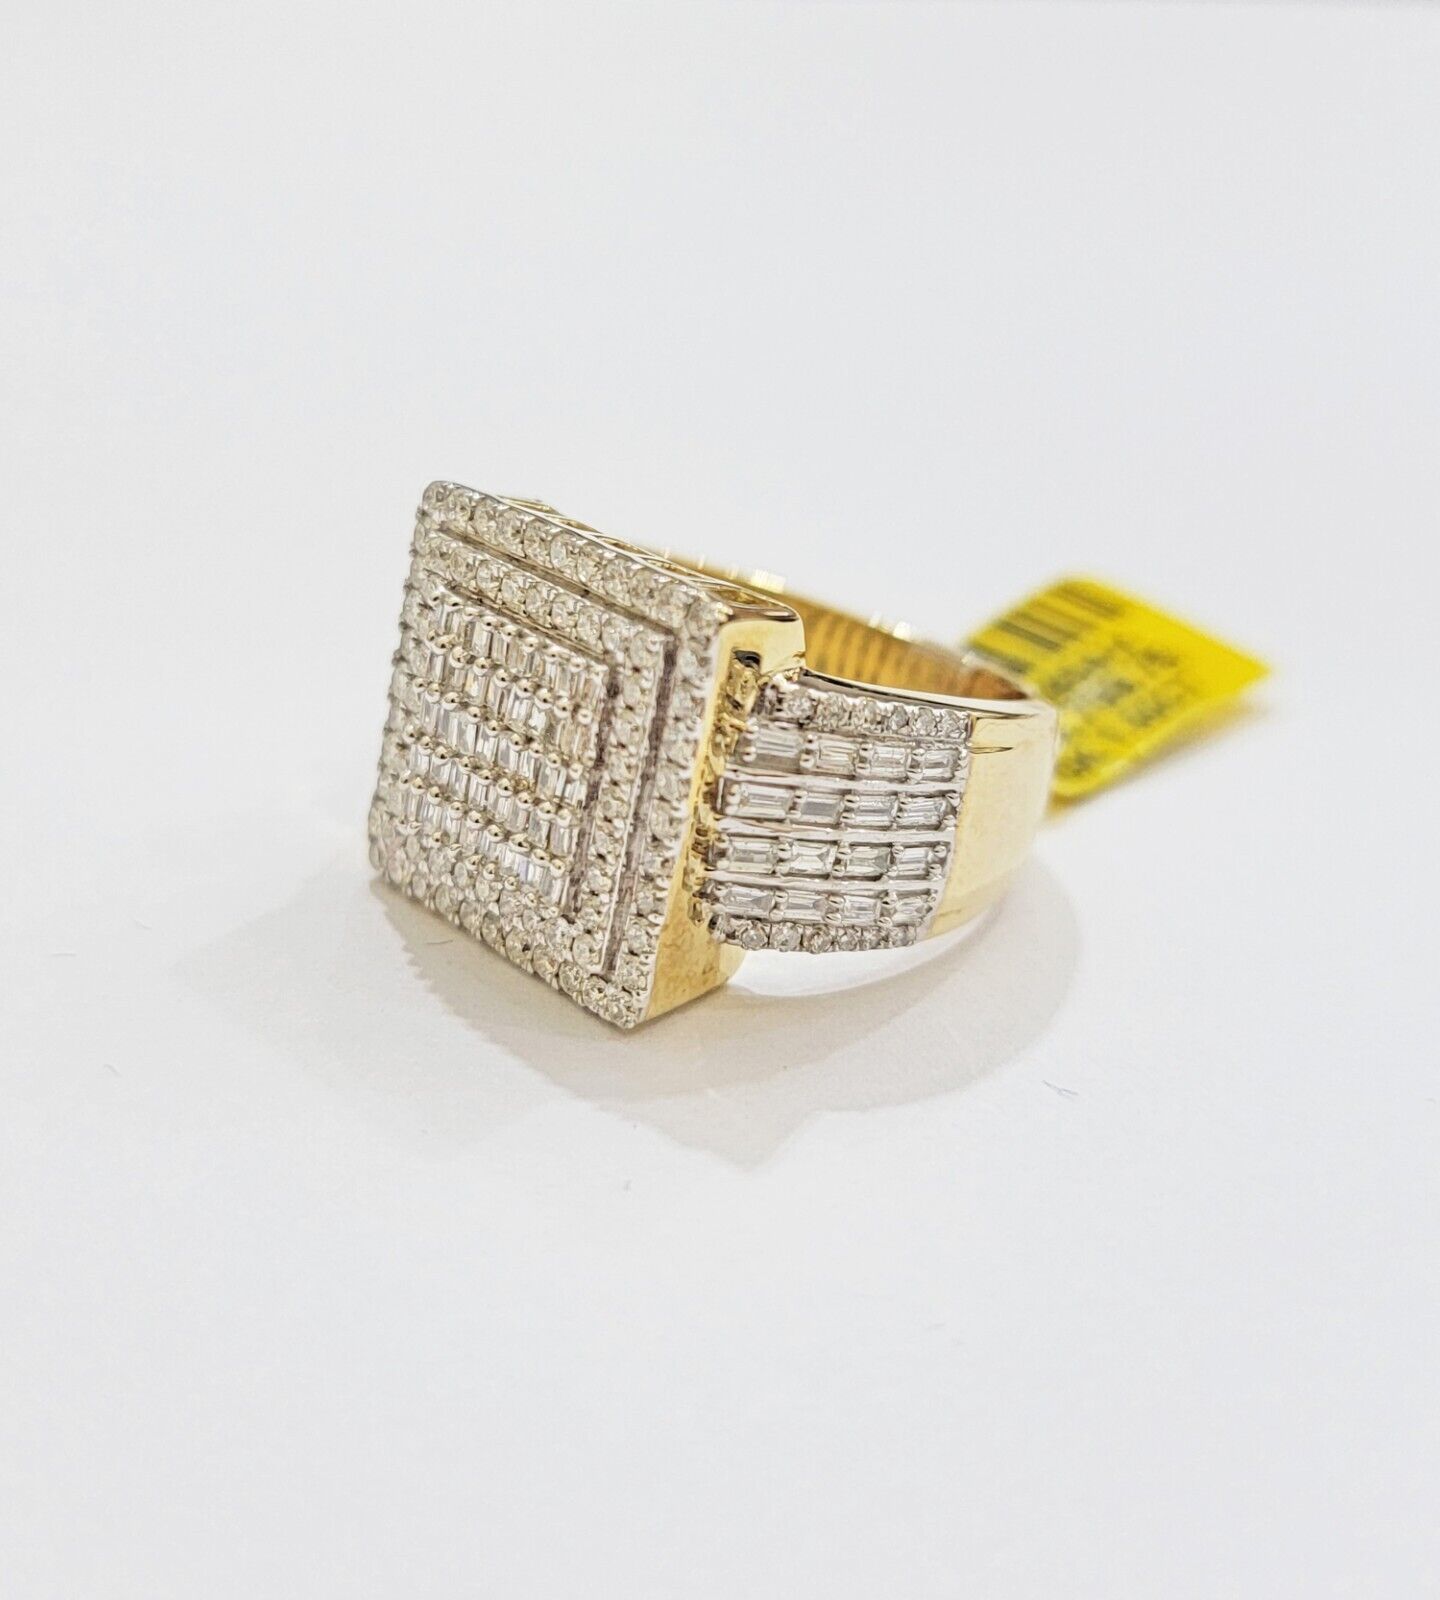 Real 10k Yellow Gold Diamond Mens Ring Size 10 1.60 CT Natural Diamonds ON SALE